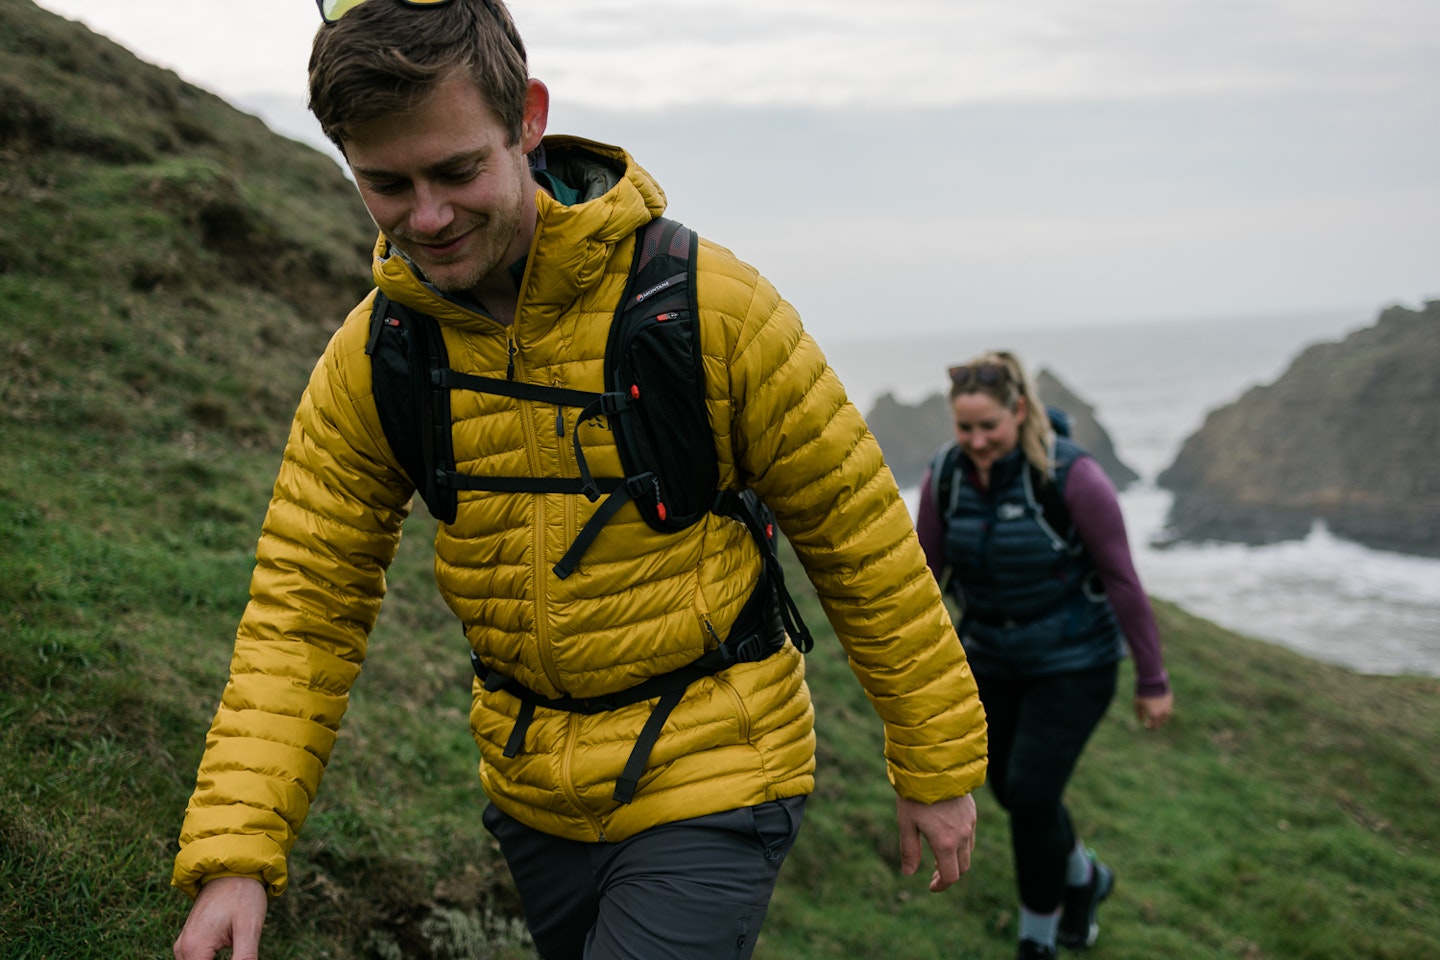 Hiking in insulated jackets